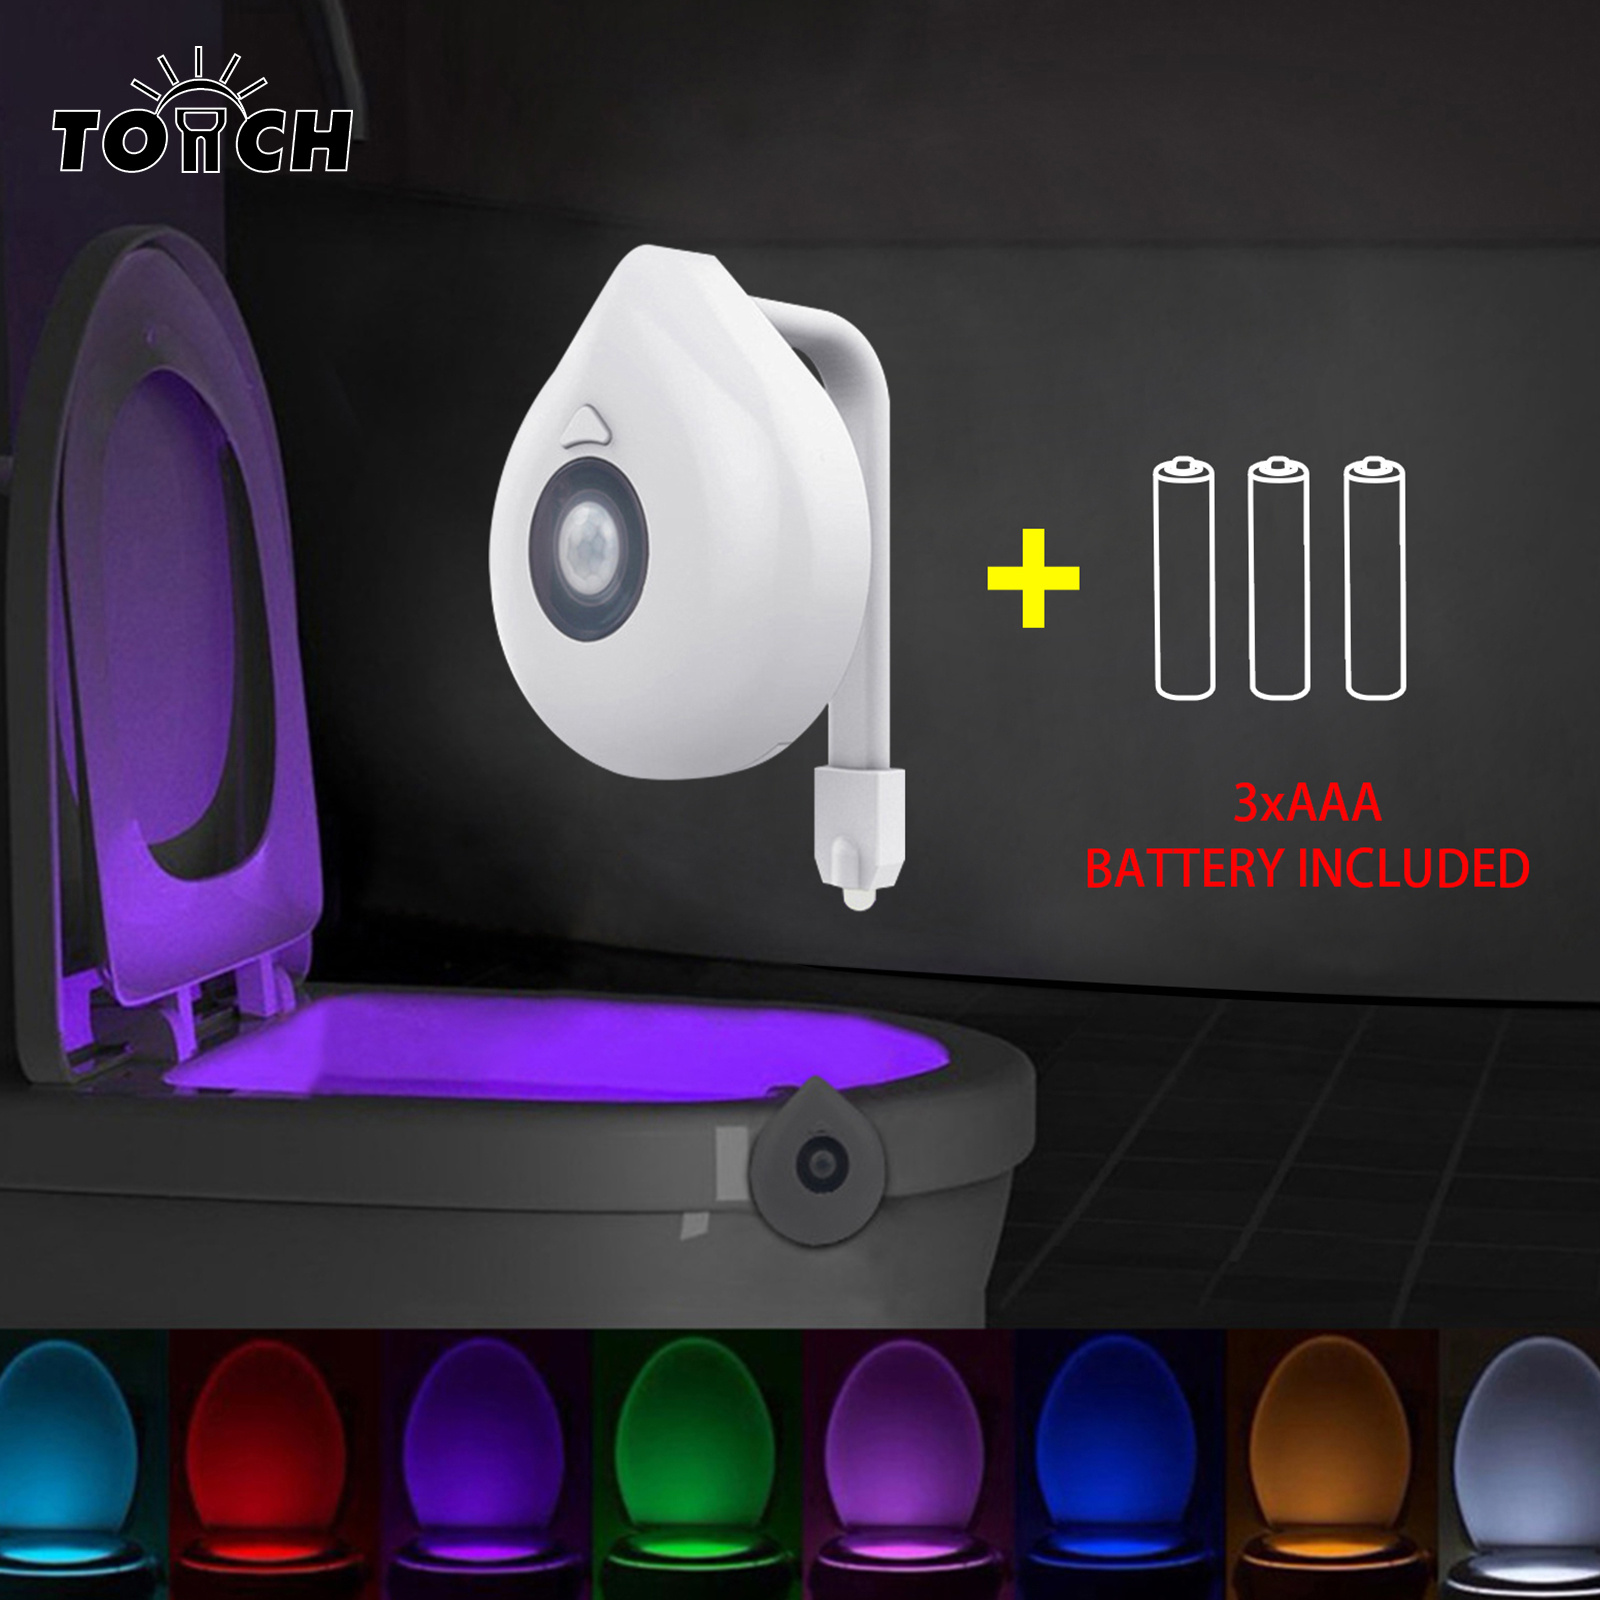 1pc Motion Activated Toilet Night Light, 8 LED Vibrant Color Options,  Flexible Sizing For Standard Or Elongated Toilet